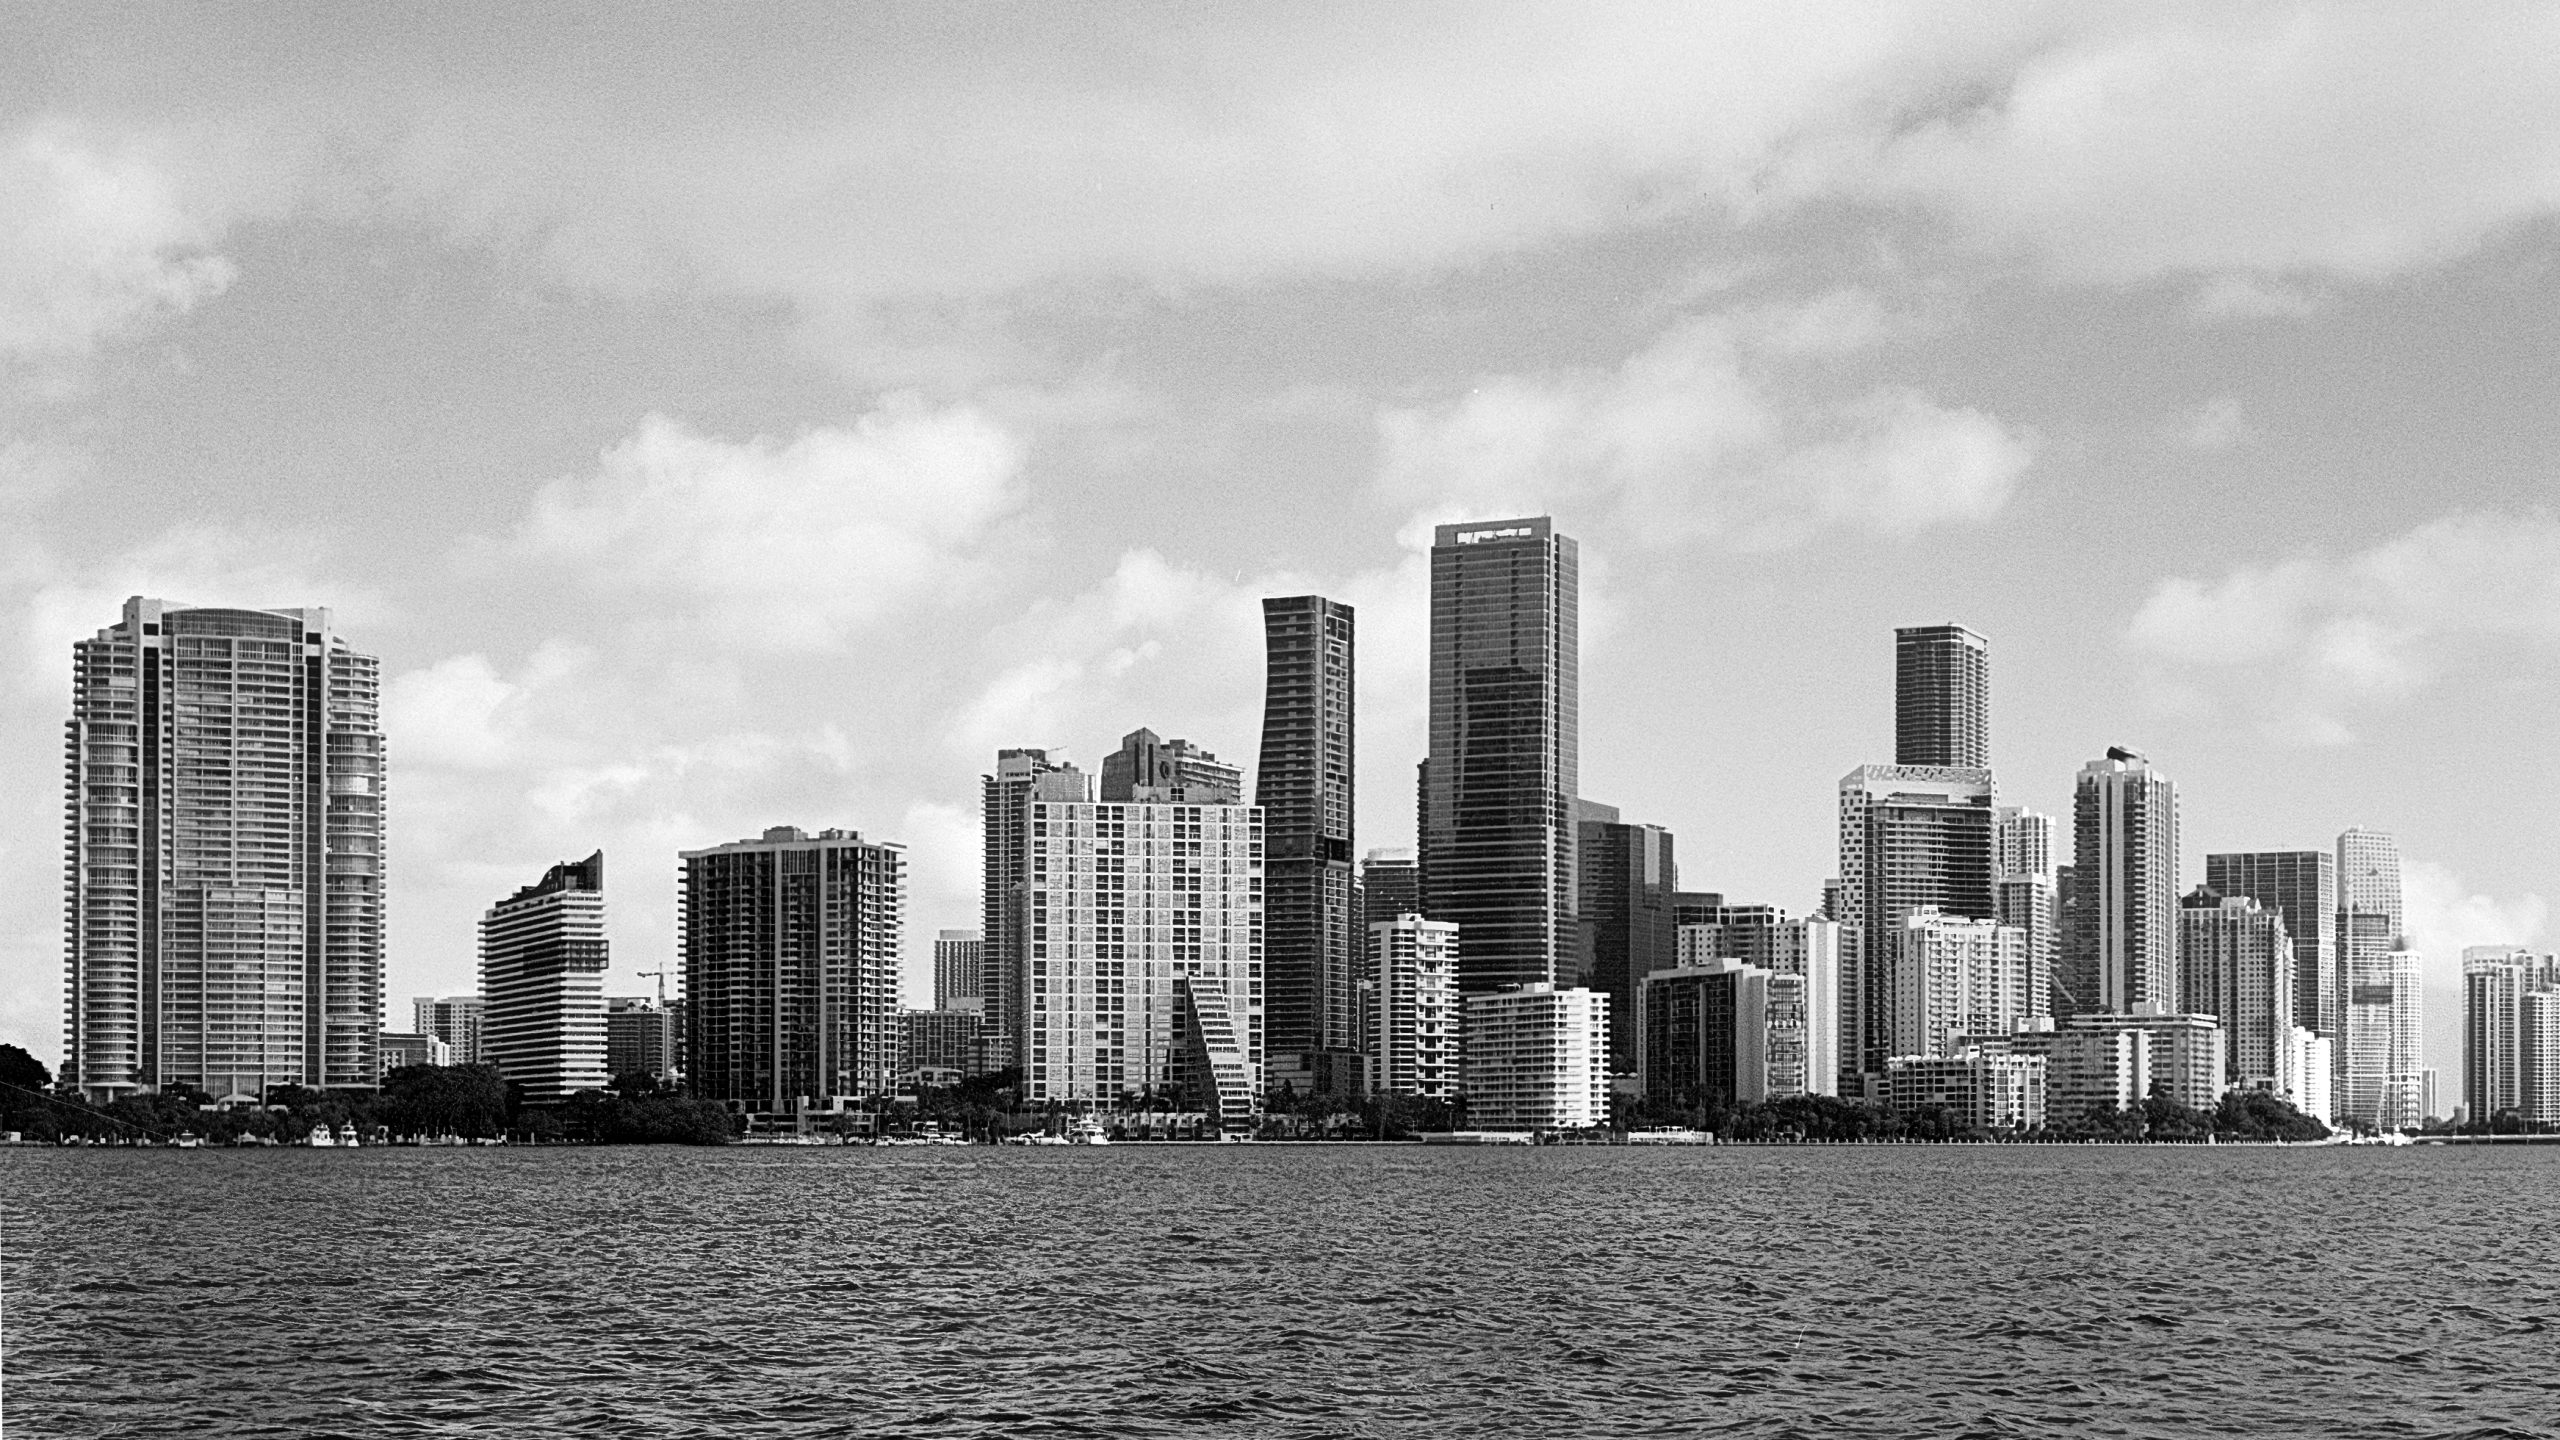 Full panorama of dowtown and Midtown Miami, Florida. Captured on Film